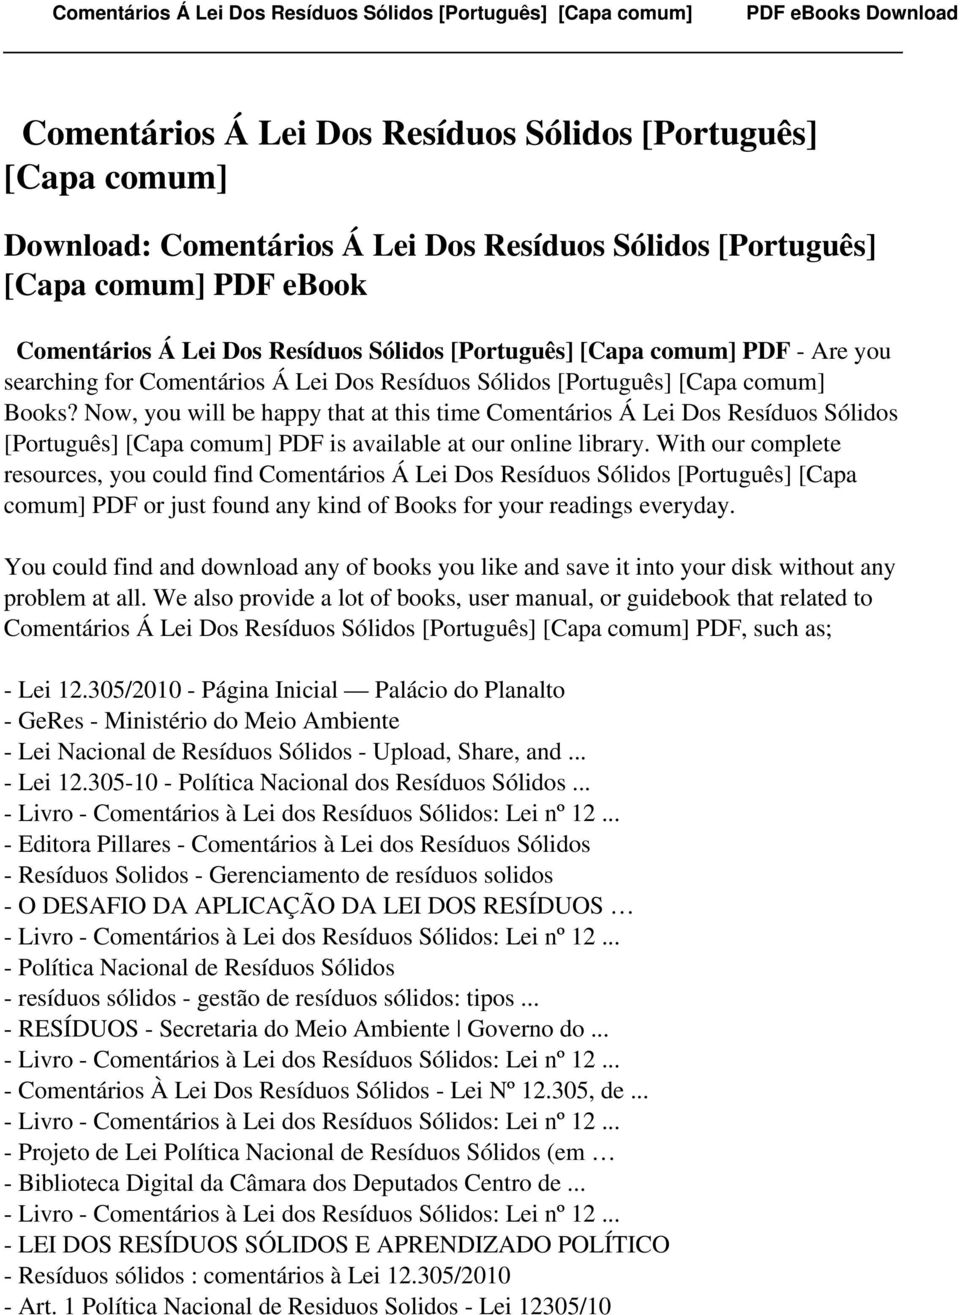 Now, you will be happy that at this time Comentários Á Lei Dos Resíduos Sólidos [Português] [Capa comum] PDF is available at our online library.